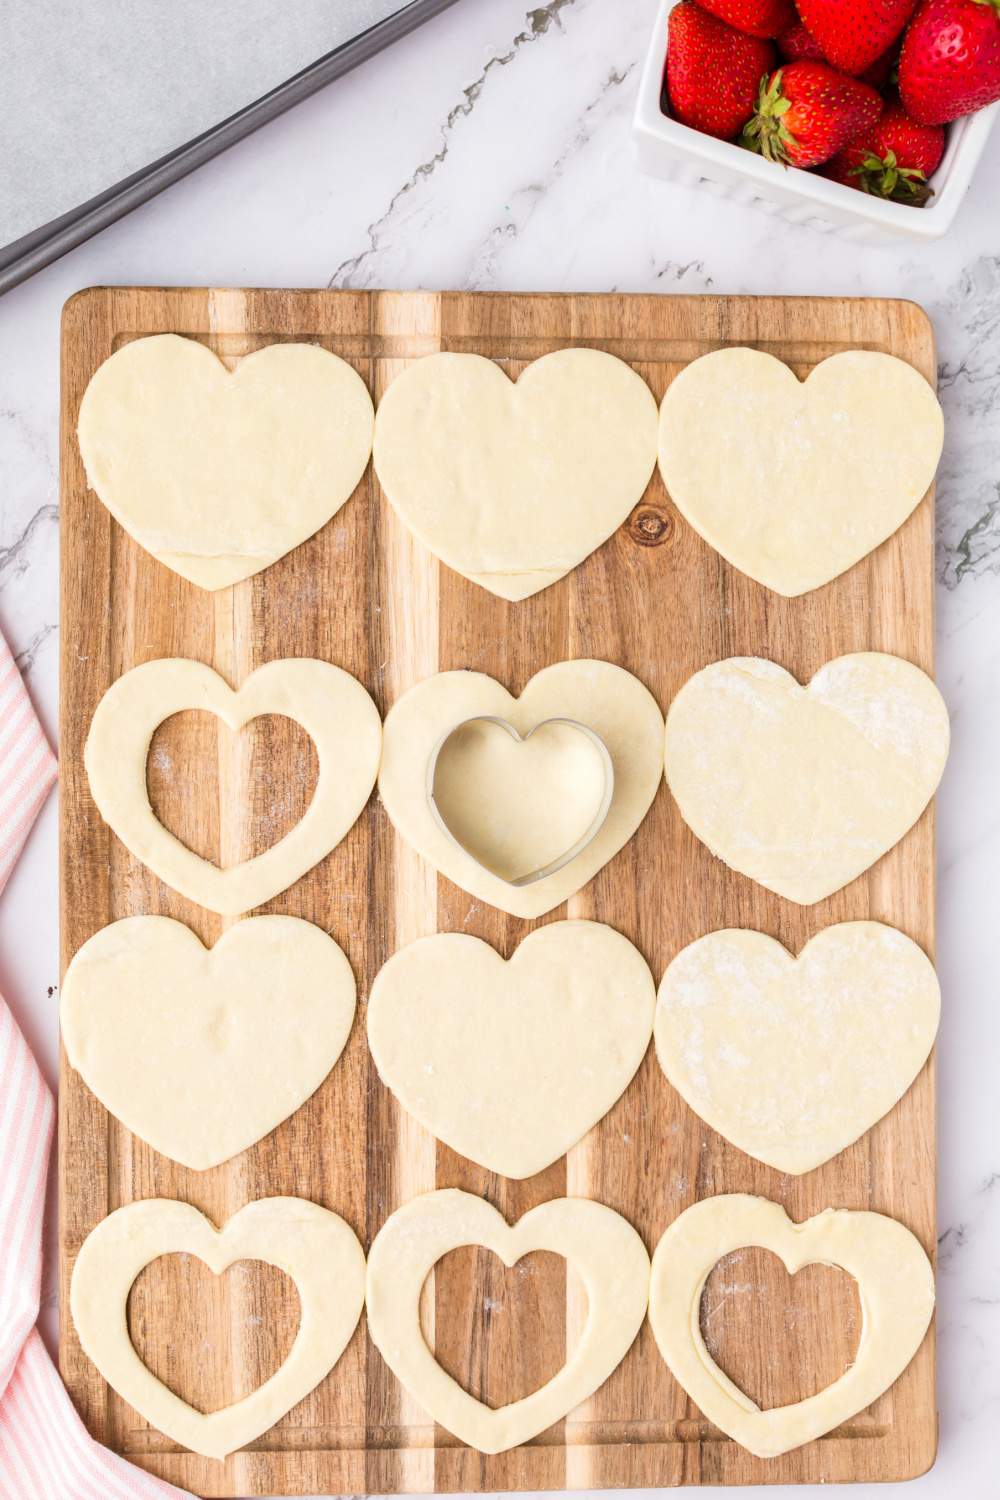 cutting smaller hearts from the center of puff pastry hearts